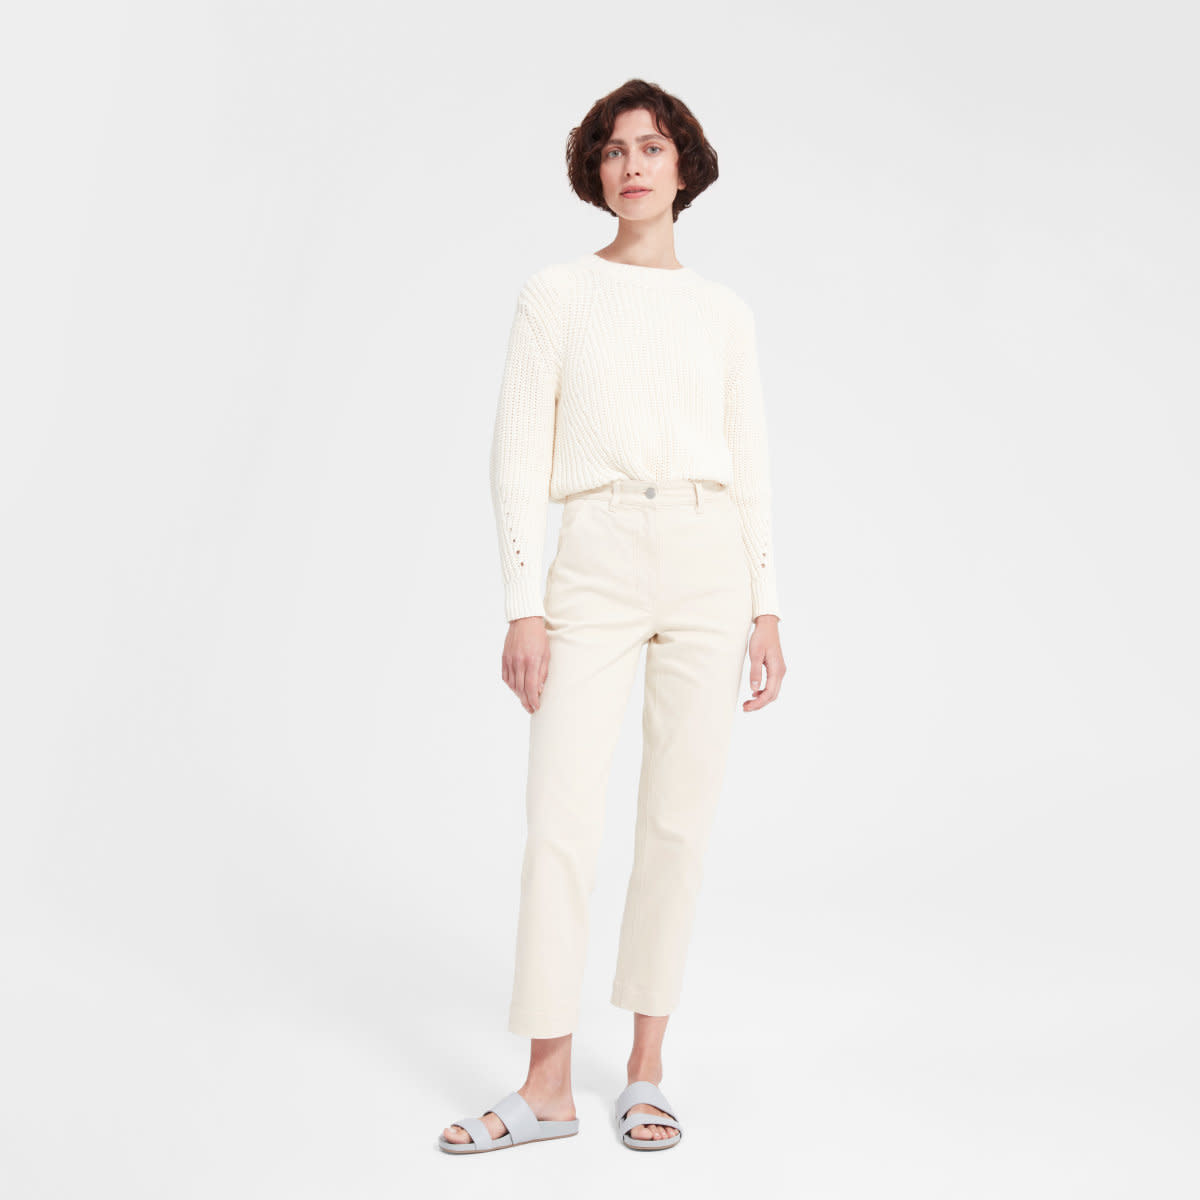 Everlane straight leg crop, $68, available here.